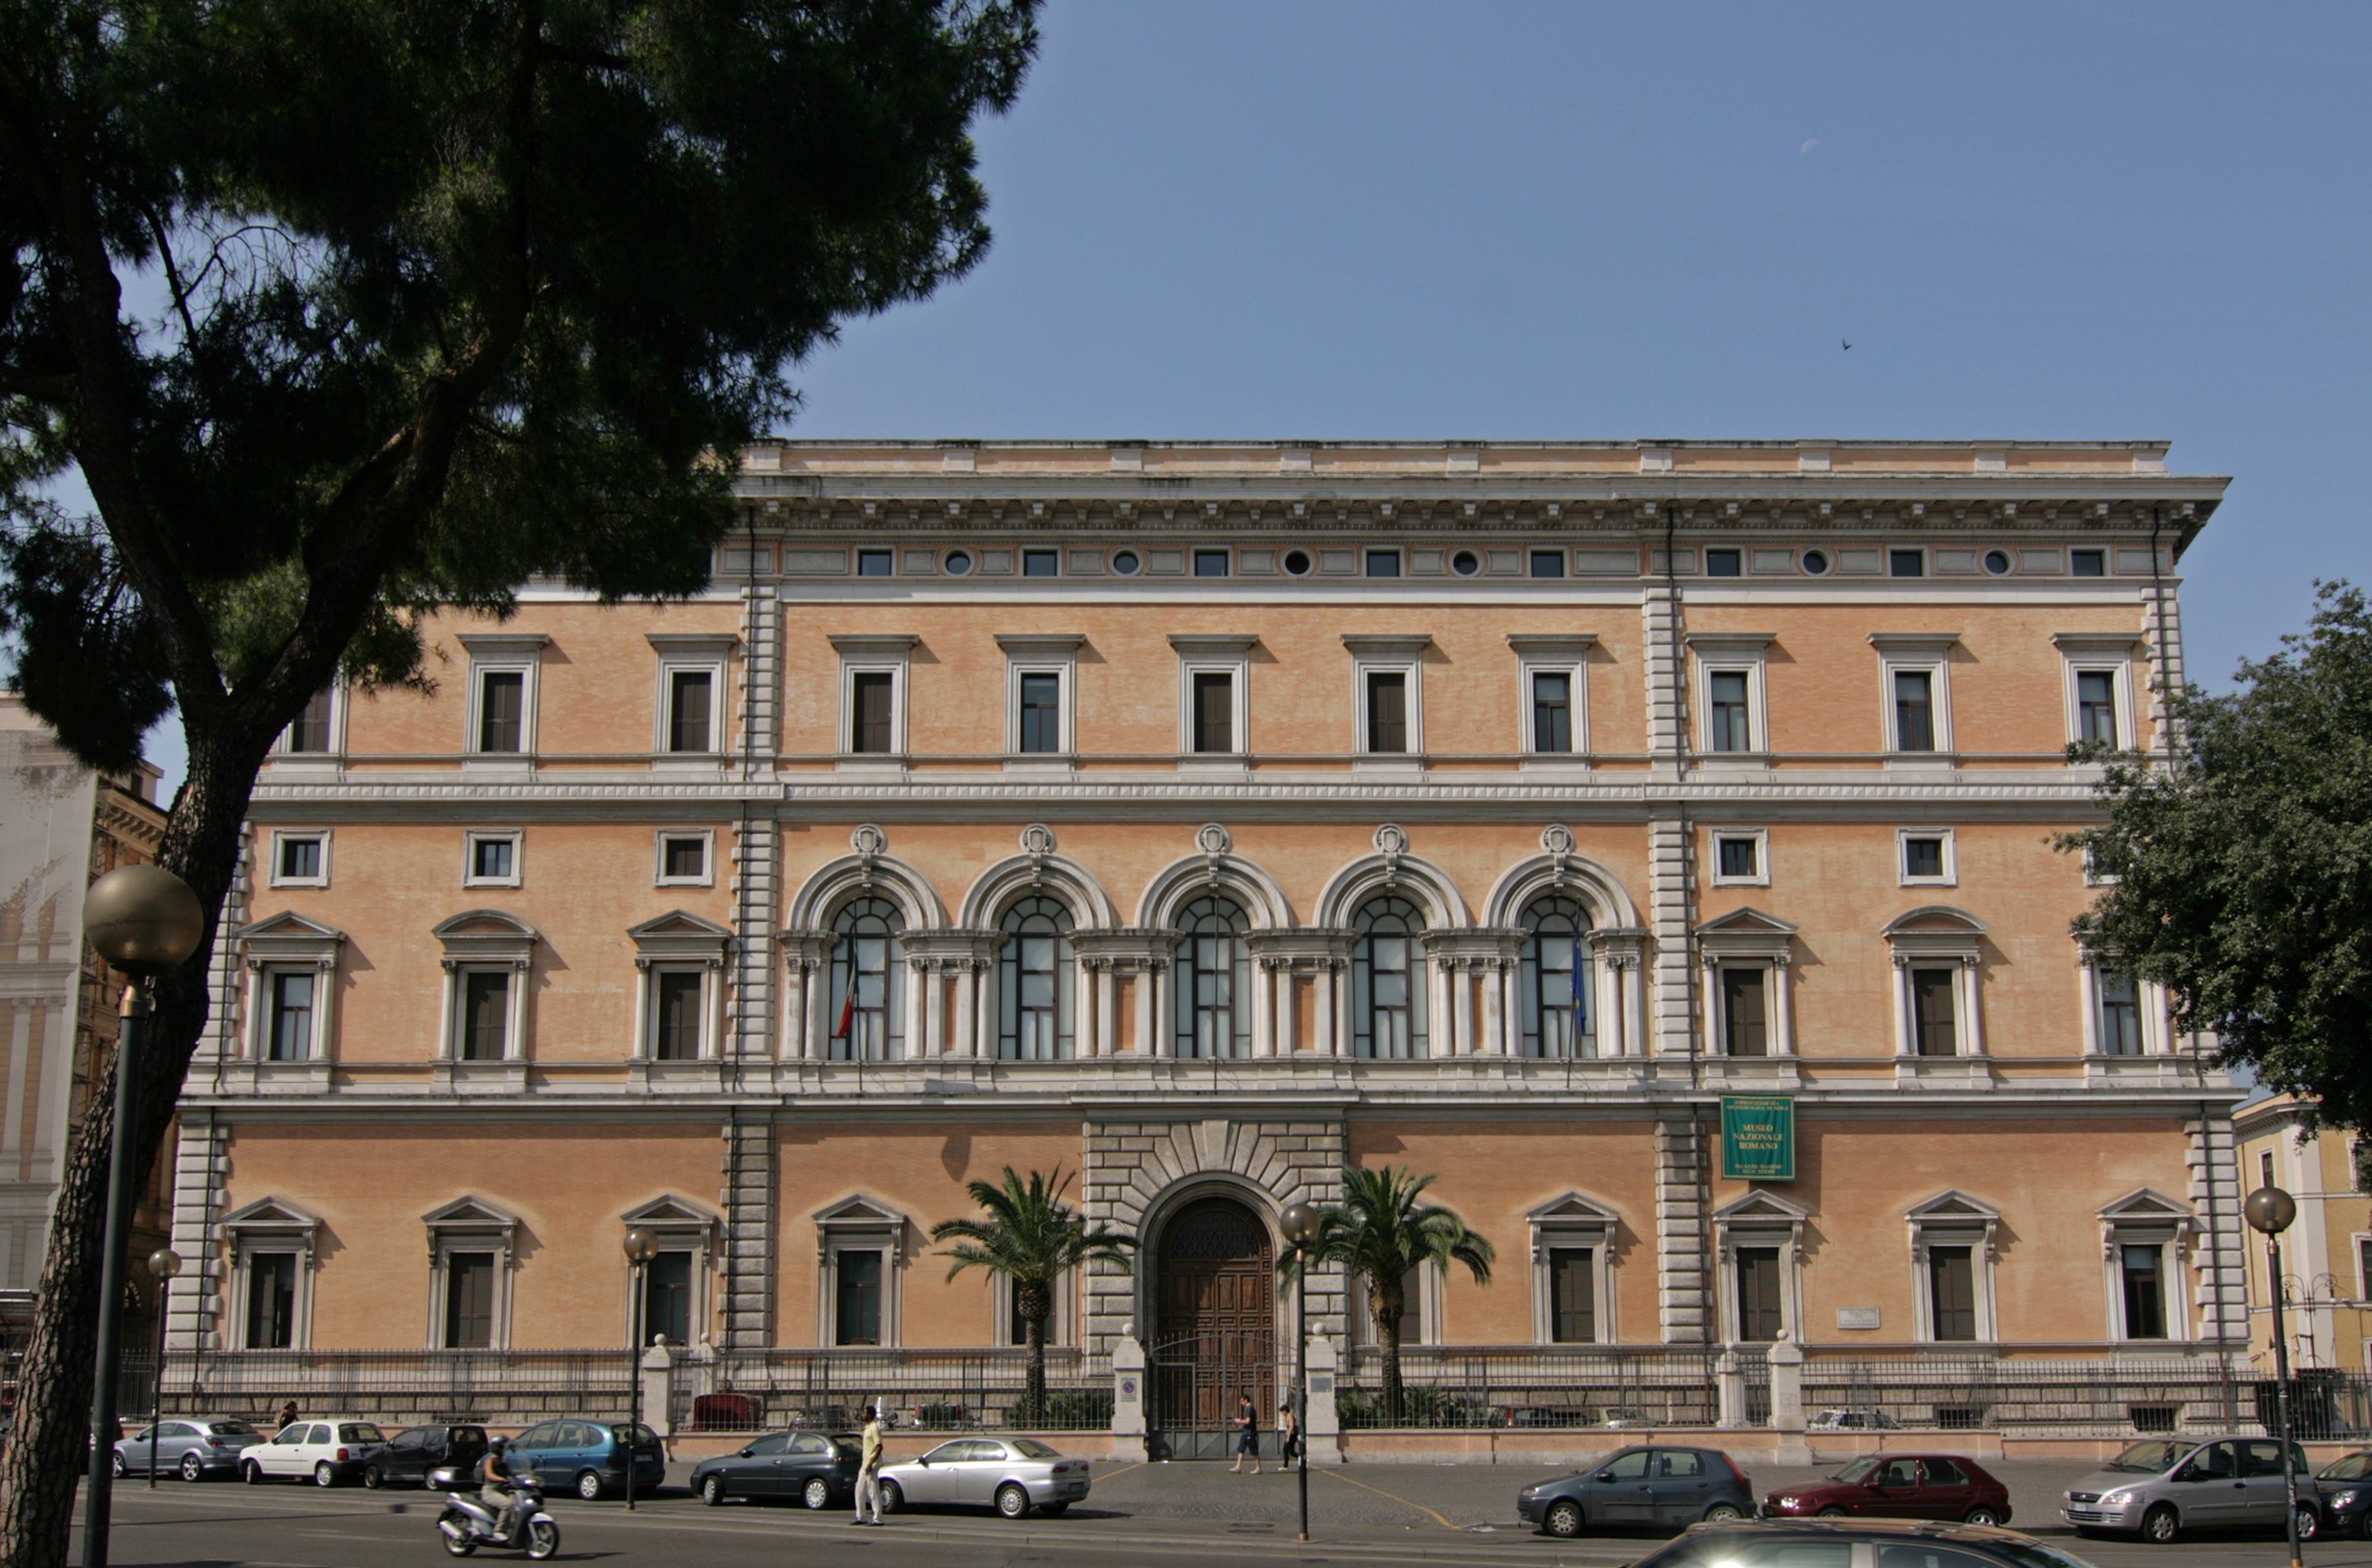 Palazzo Massimo alle Terme, Rome: All year